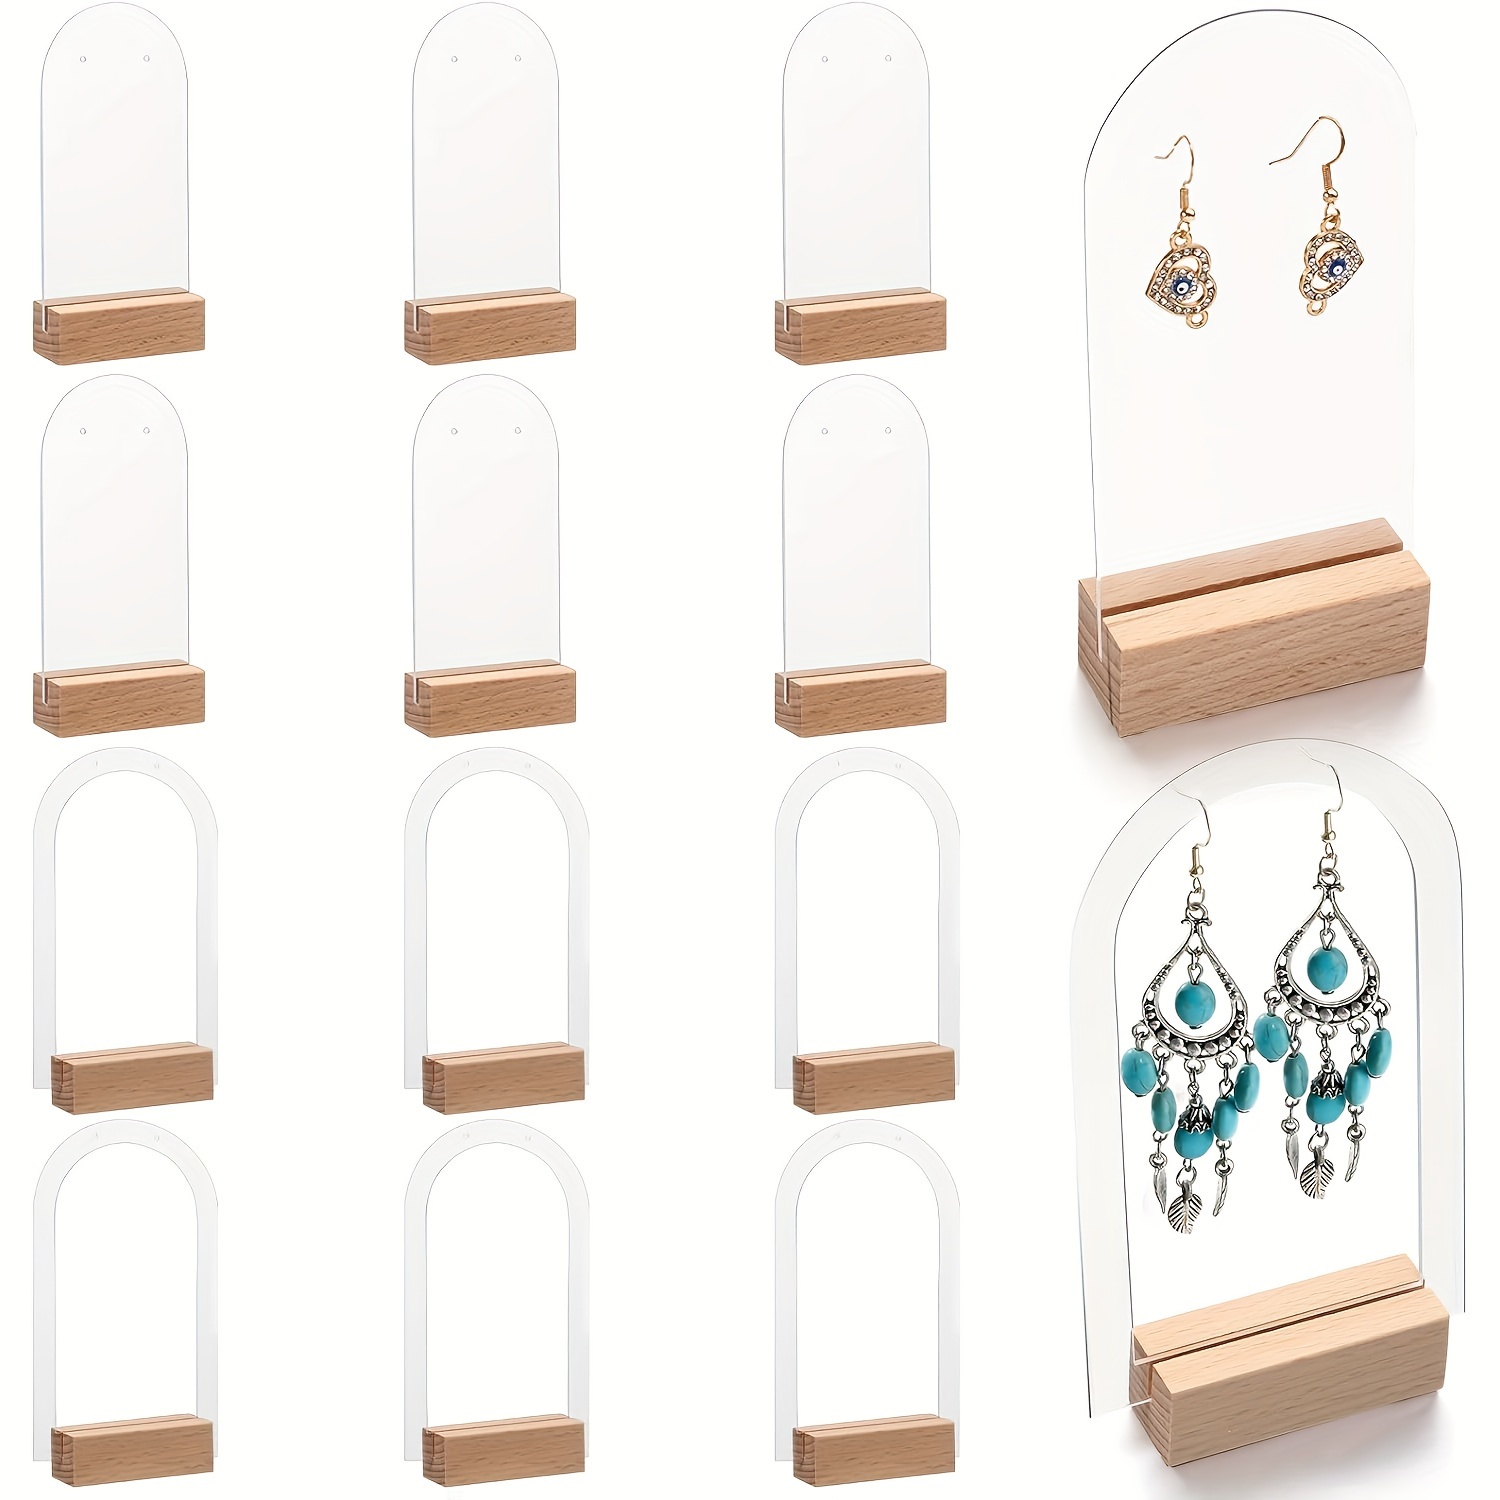 

6pcs Acrylic Earring Display Stand With Wooden Base - Arch Shape Jewelry Retail Holder For Studs And Dangle Earrings